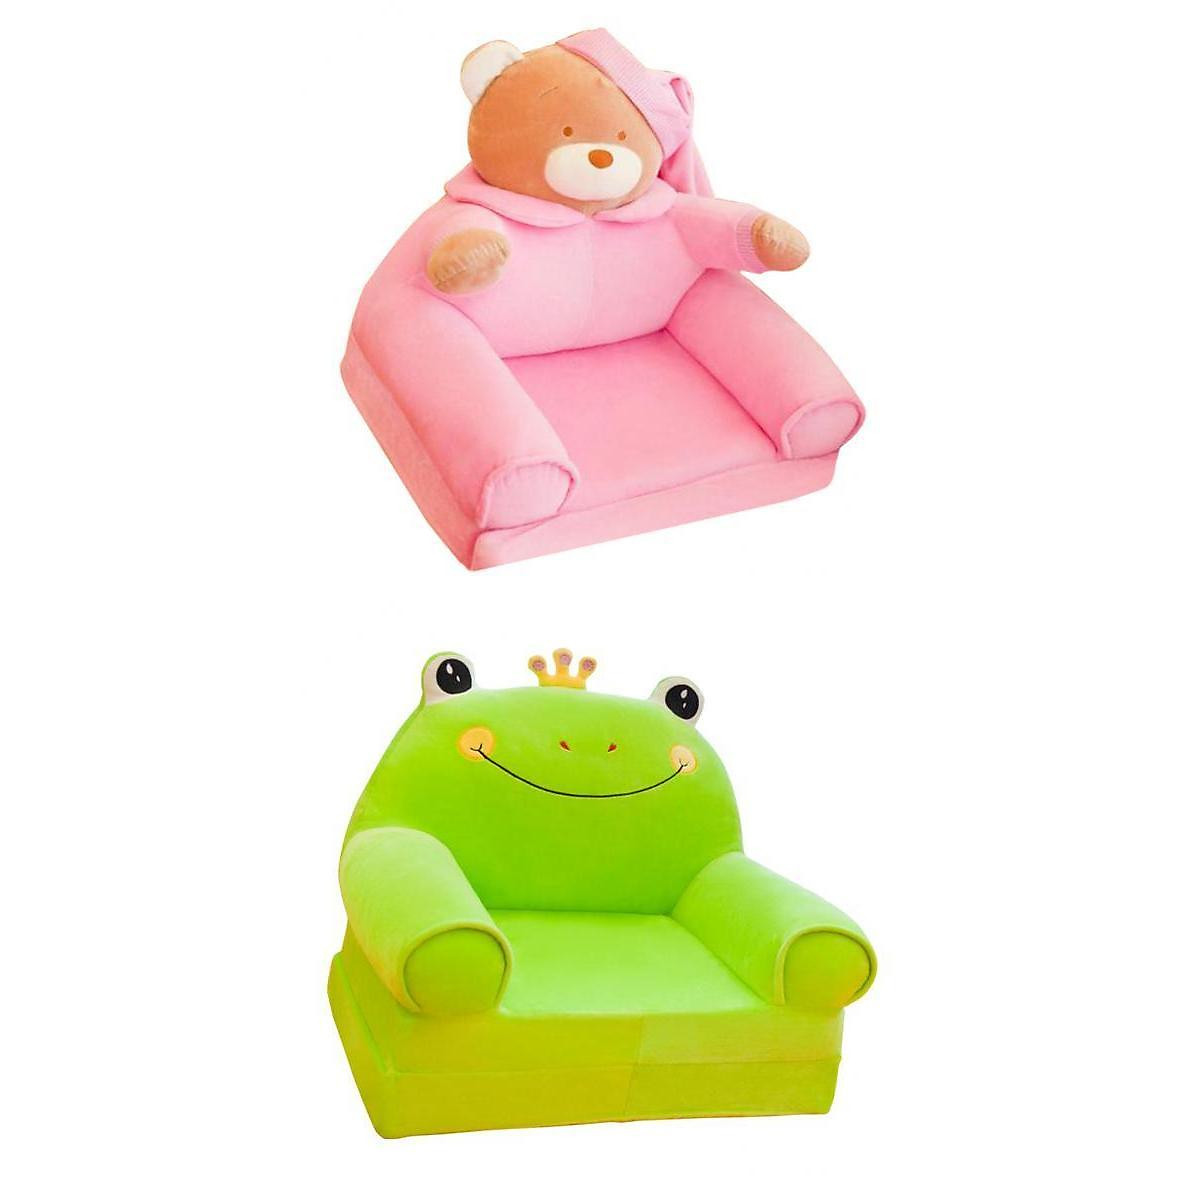 Mua 2 Kids Foldable Sofa Chair Cover Cartoon Bear Frog Couch Cover for  Children tại Magideal2